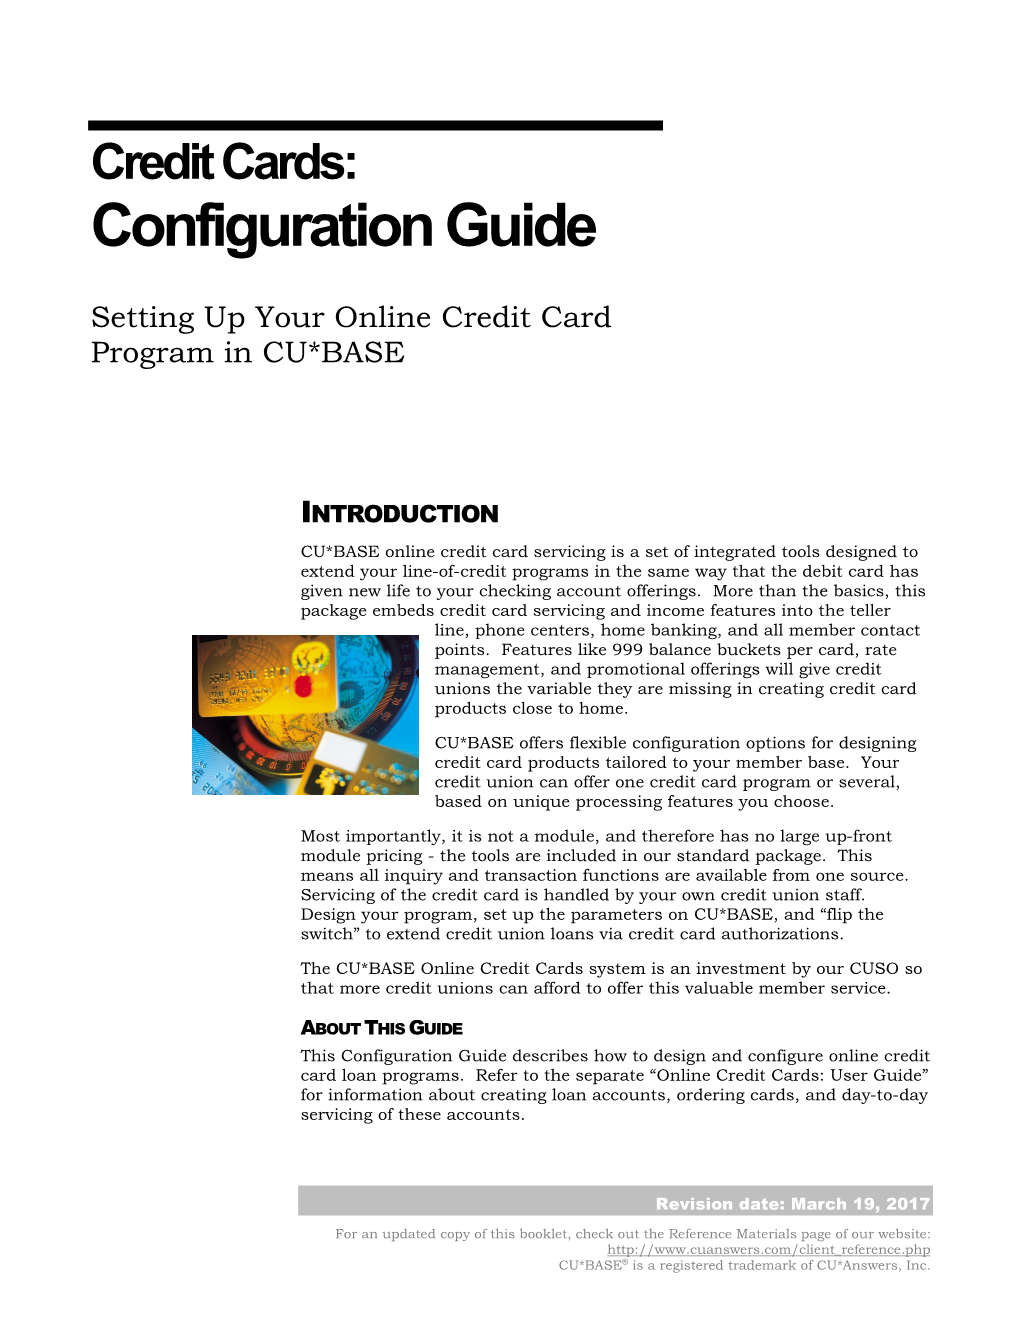 Credit Cards: Configuration Guide